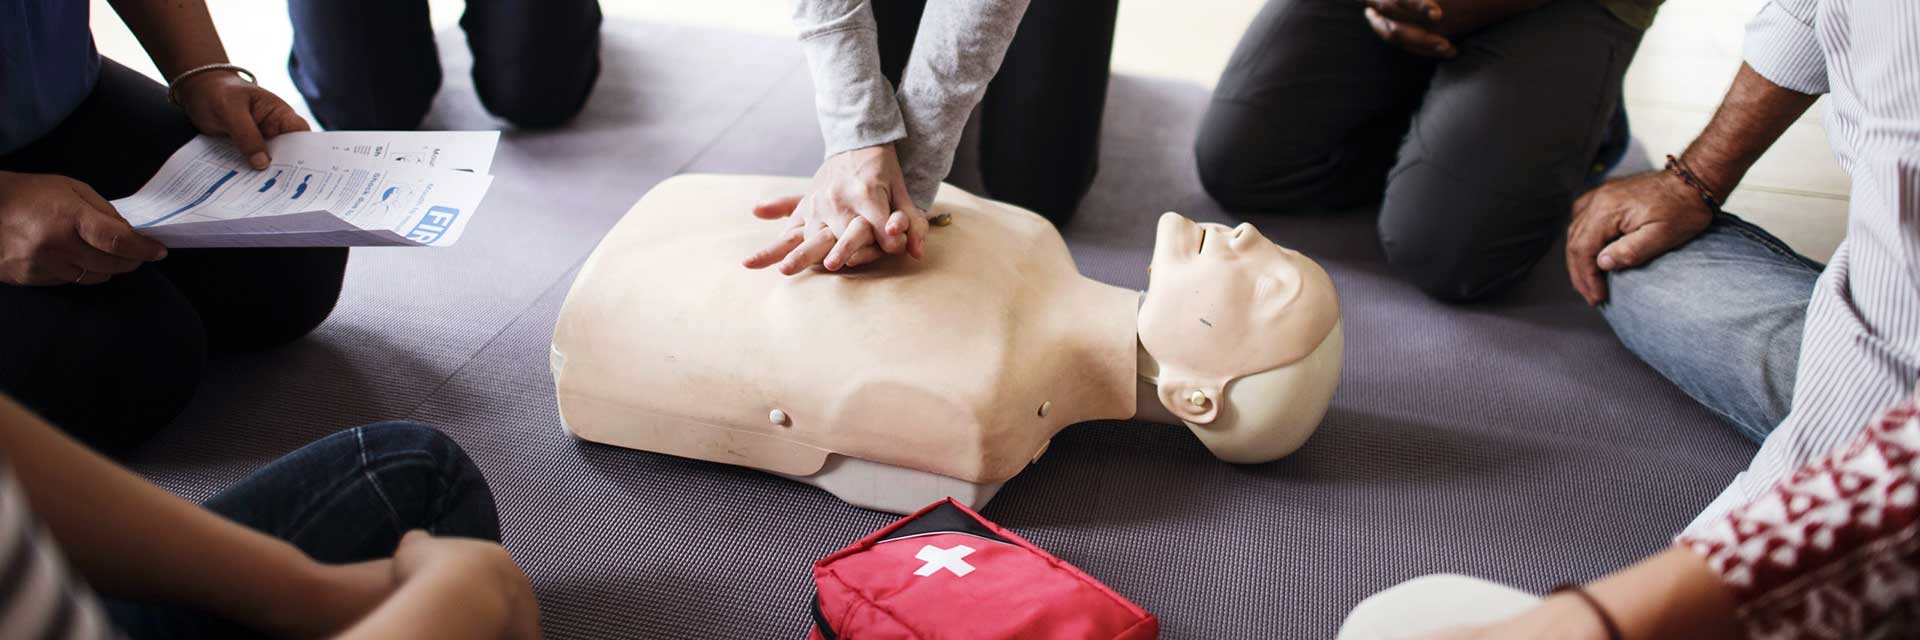 Group of people learning first aid.